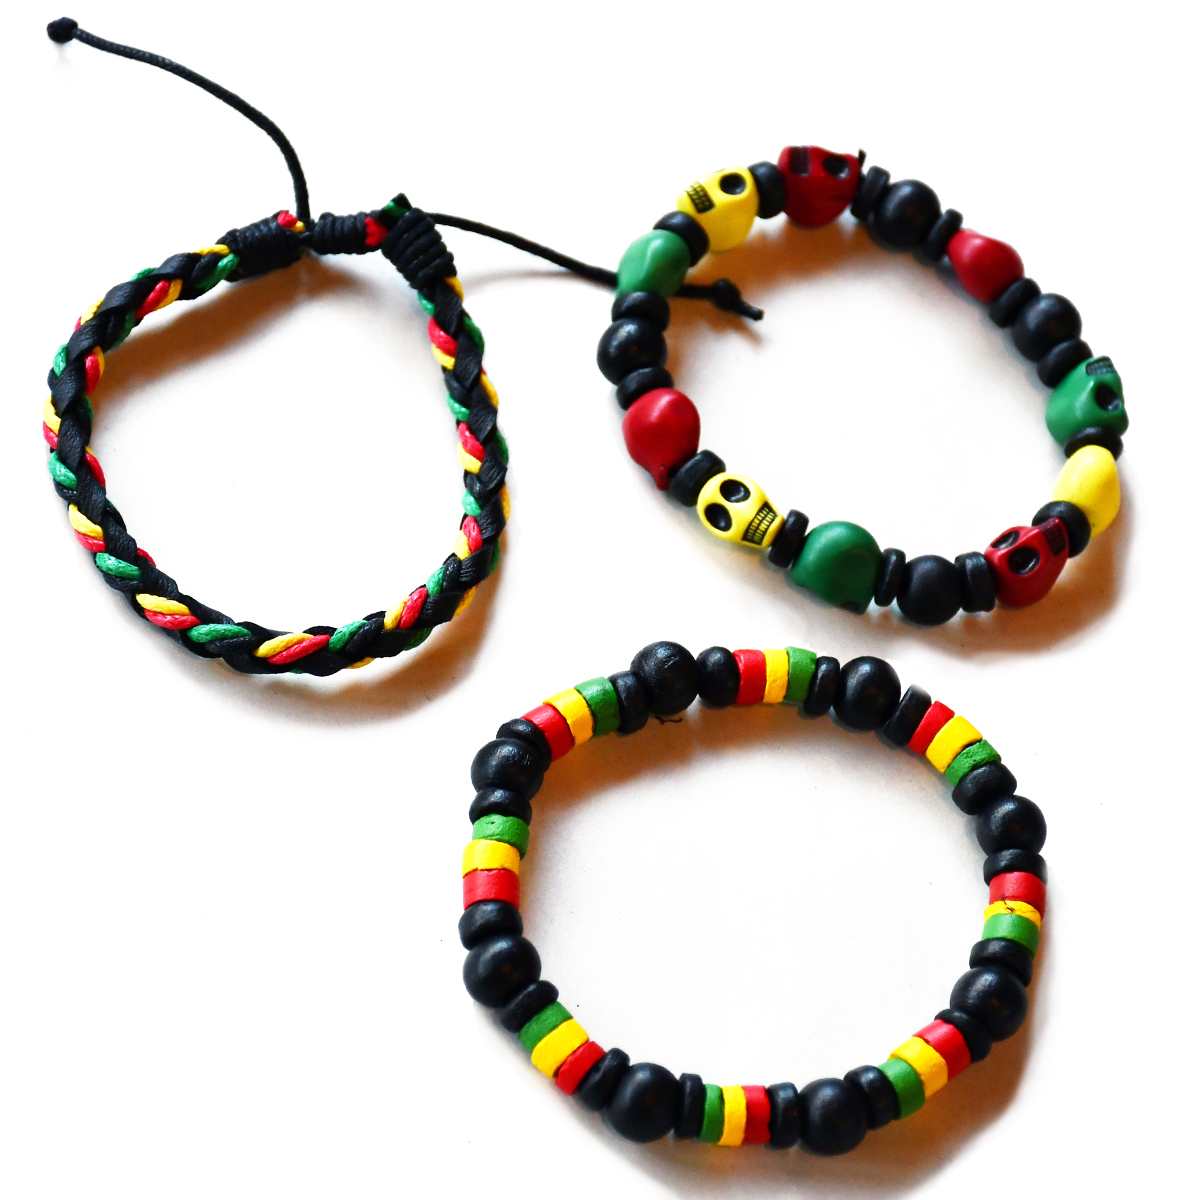 Multicolored African Beads For Hair Or Jewelry